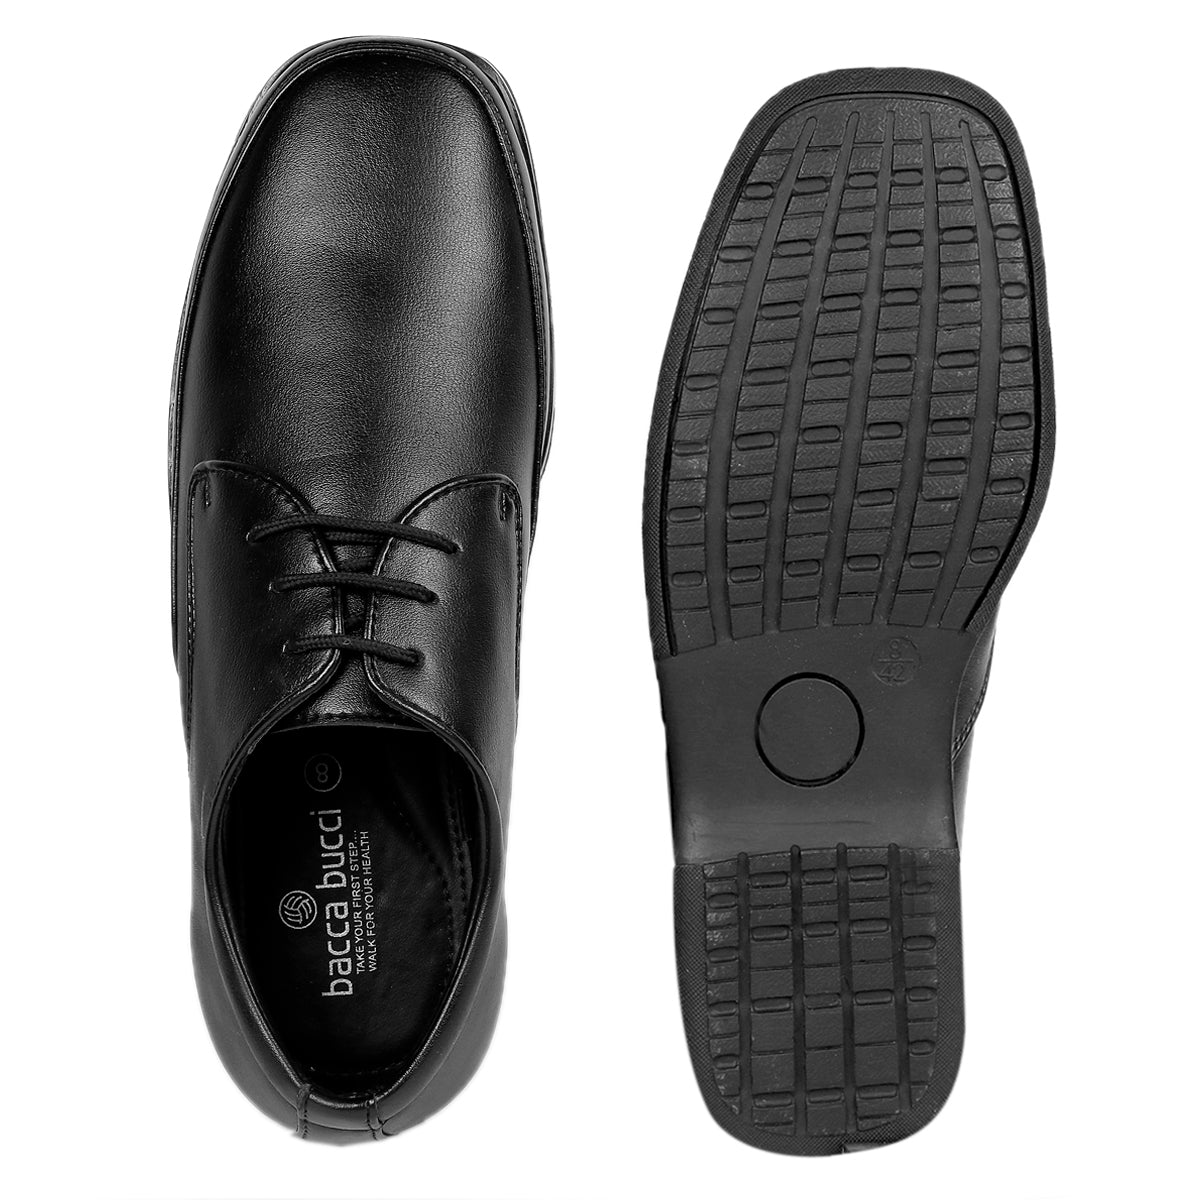 Bacca Bucci BOLTON Men Plus Size Formal lace-up Shoes with Superior Comfort (UK-11 to 13) - Bacca Bucci